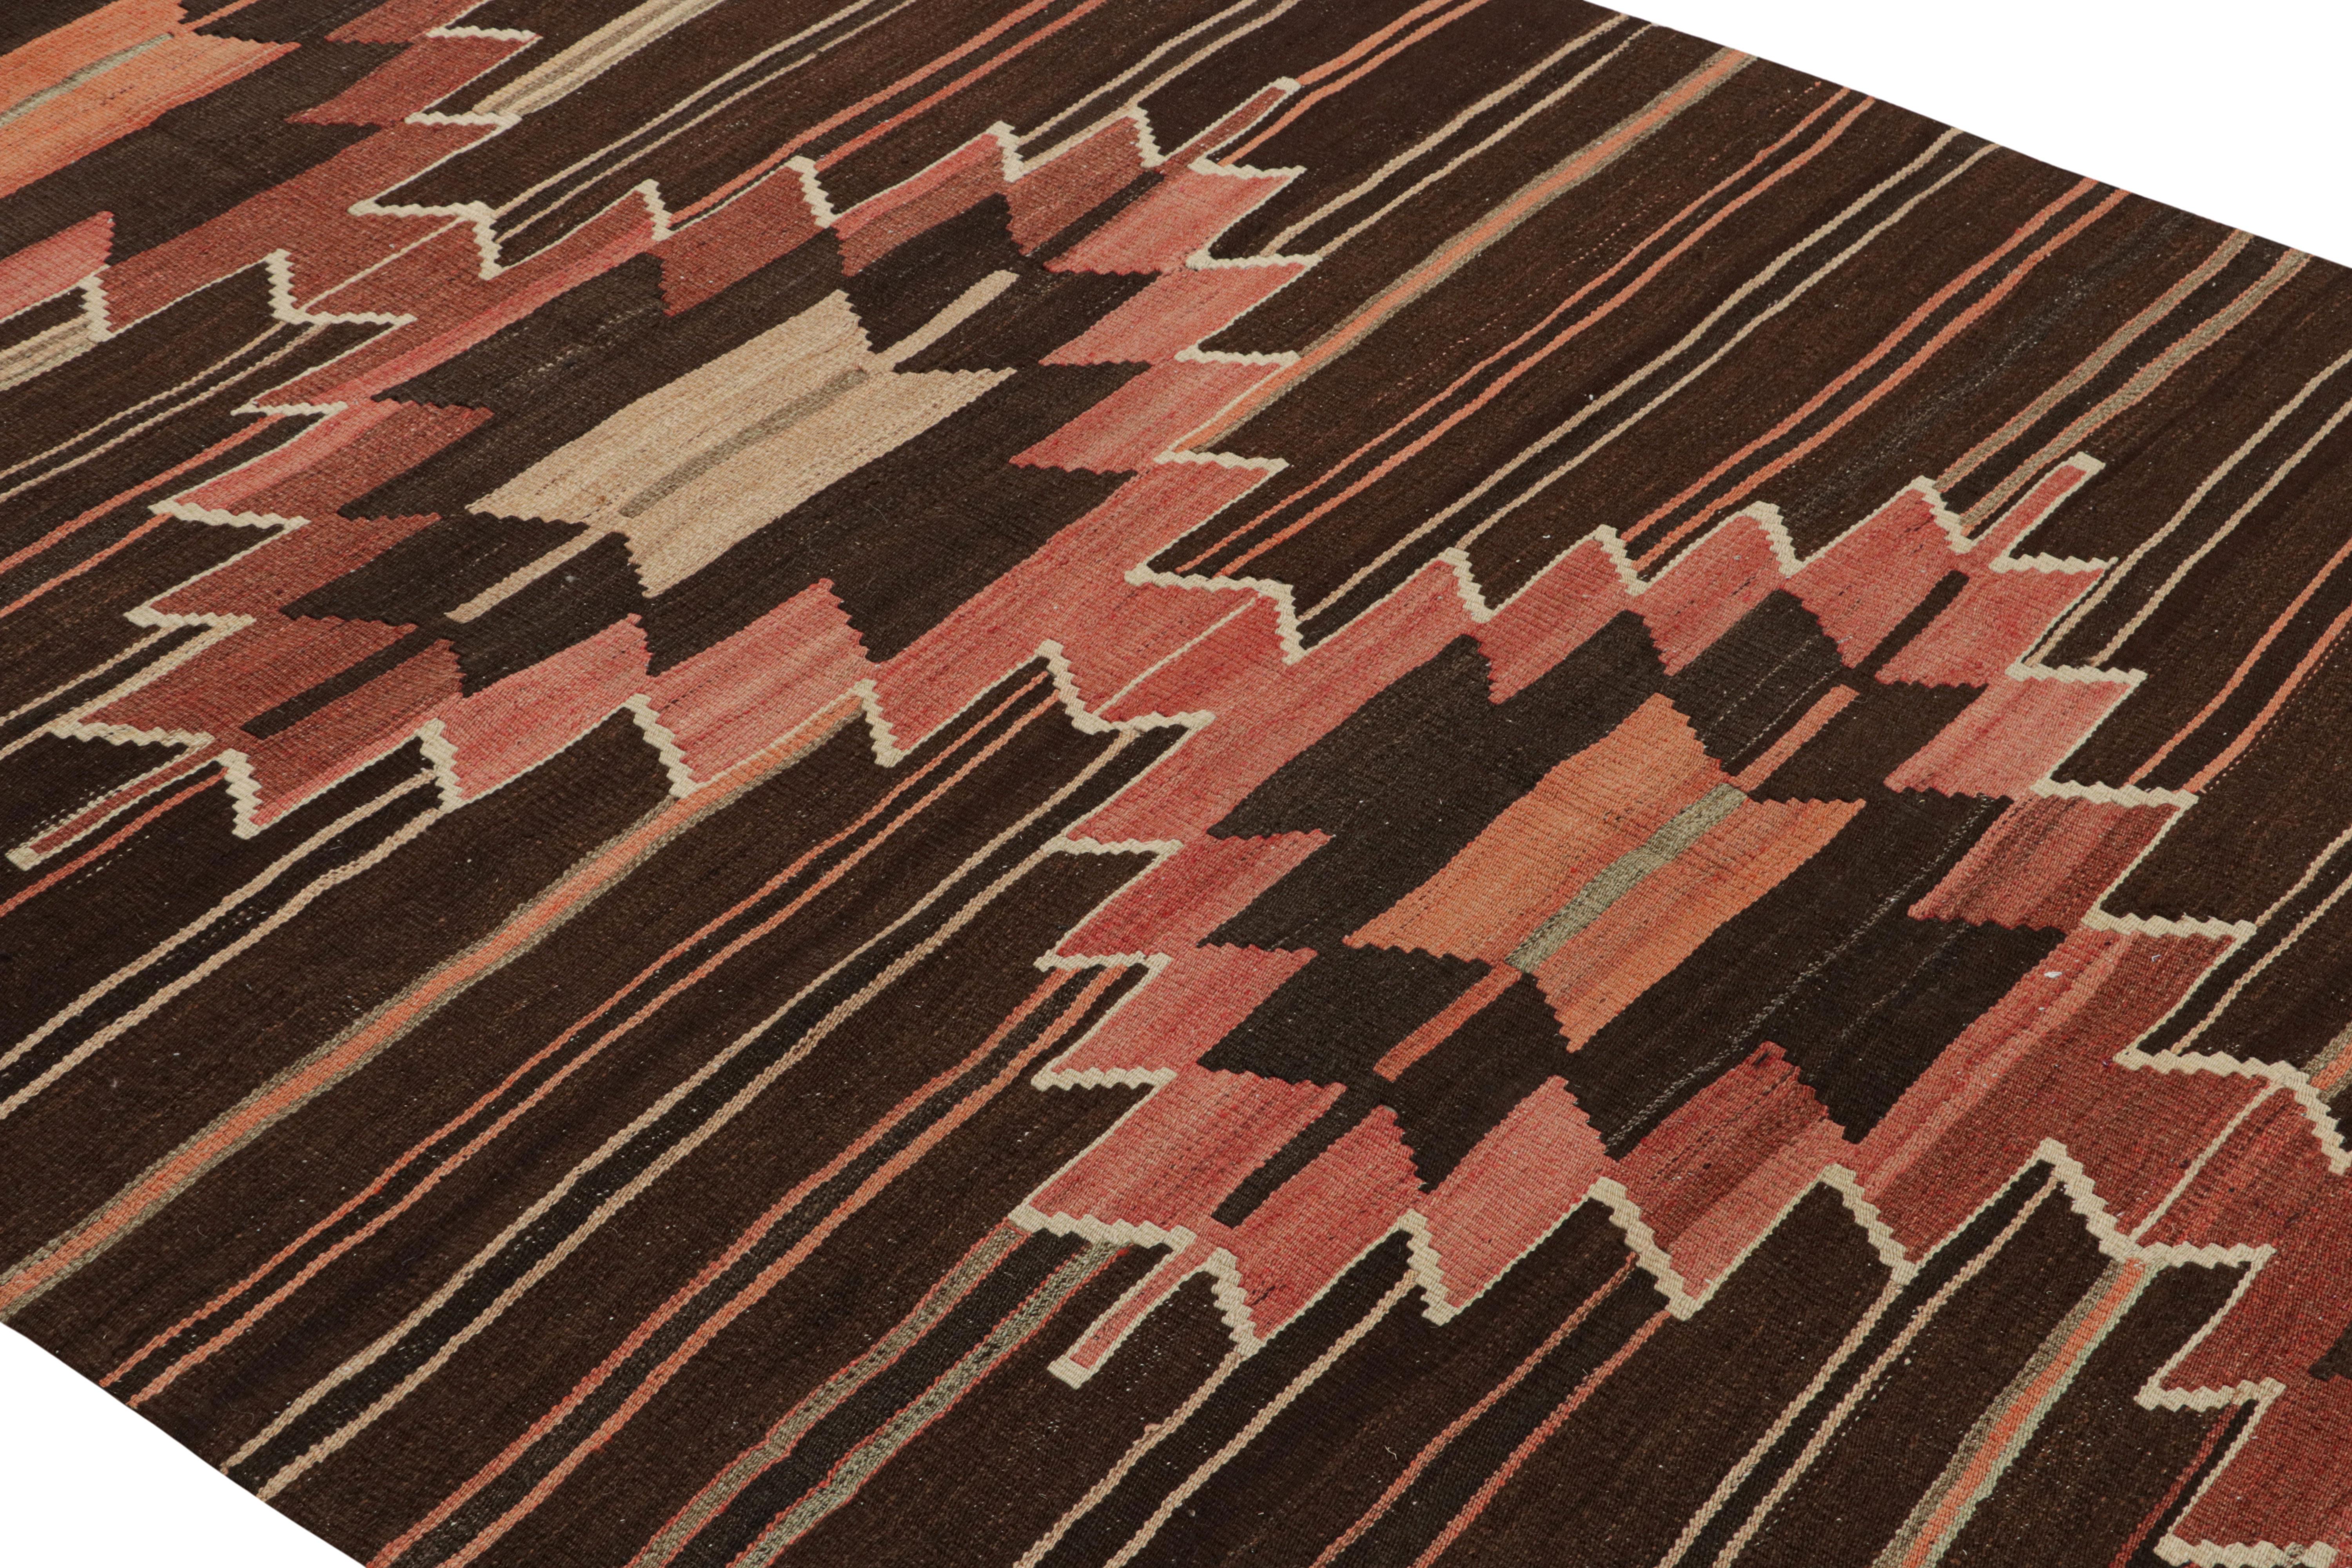 Flat-woven in Turkey originating between 1950-1960, this vintage midcentury tribal Kilim hails from the town of Mut, celebrating the Turkish tradition of marrying sharp geometric dimensionality with a blend of rich and lively hues. The balance of